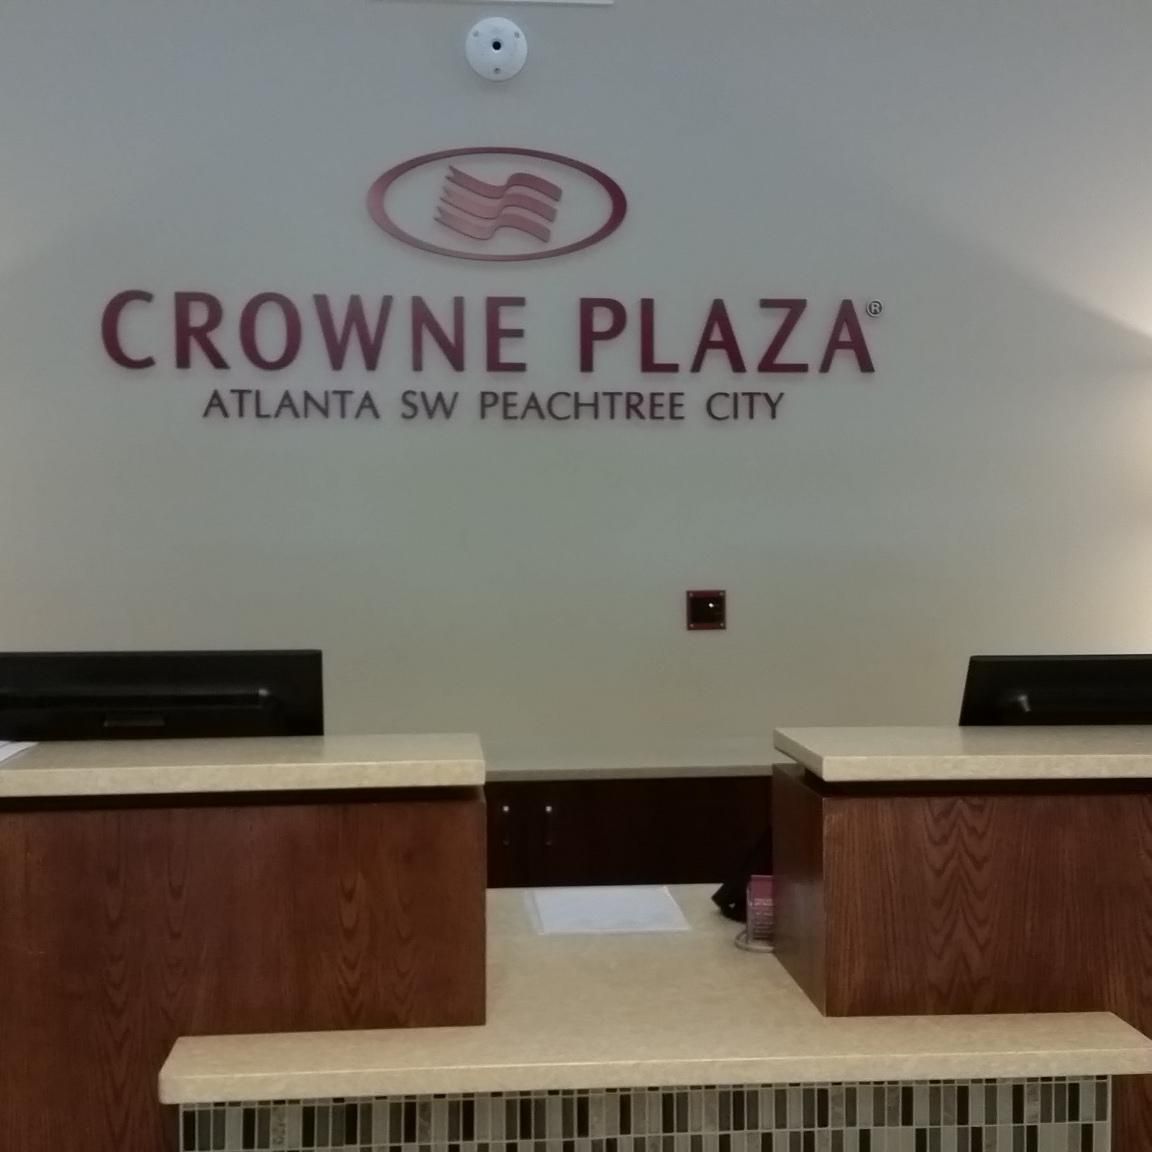 Welcome to the Crowne Plaza Atlanta SW Peachtree City